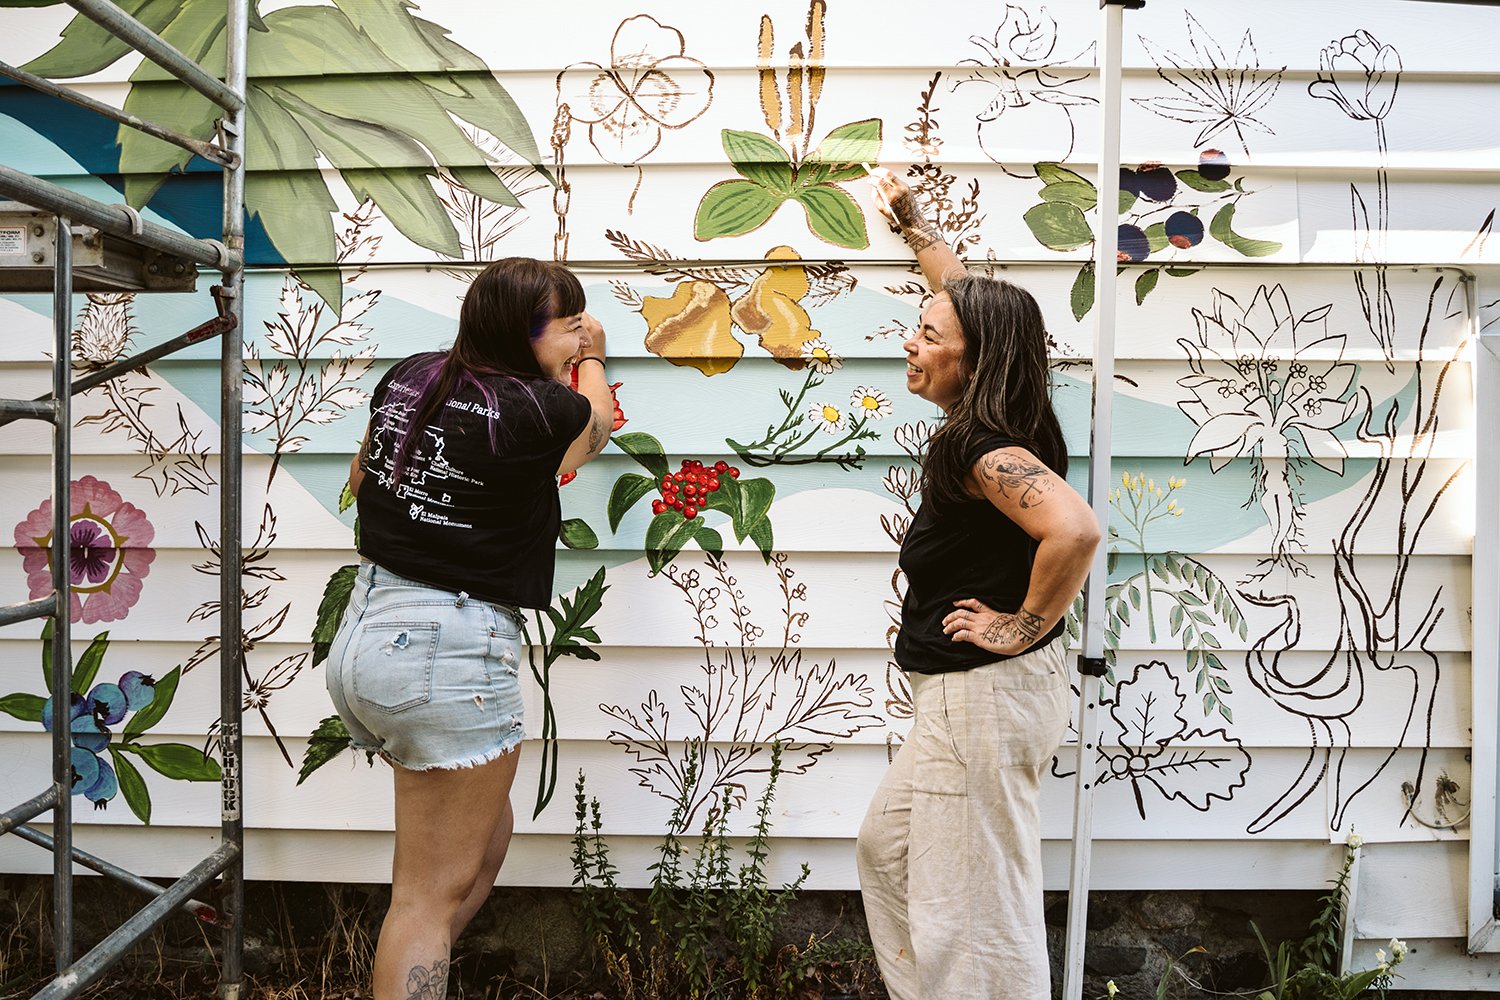 Femmes-Risin-mural-with-Nicole-and-Stephanie-Fernwood-Mural-Fest-Aly-Sibley-Photography.jpg